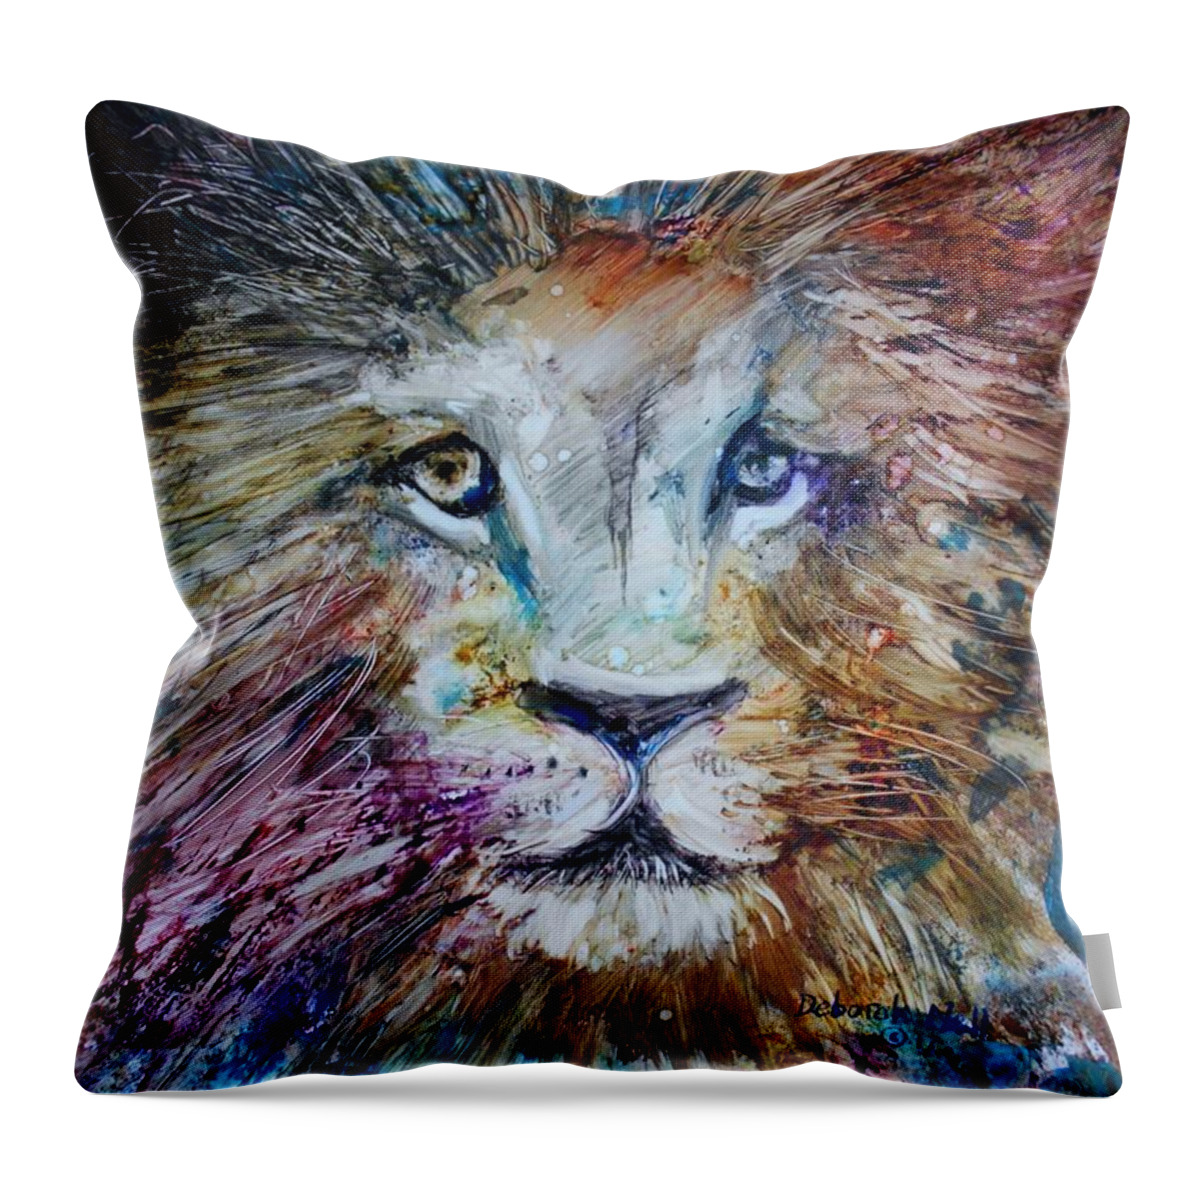 Lion Throw Pillow featuring the painting The Lion by Deborah Nell